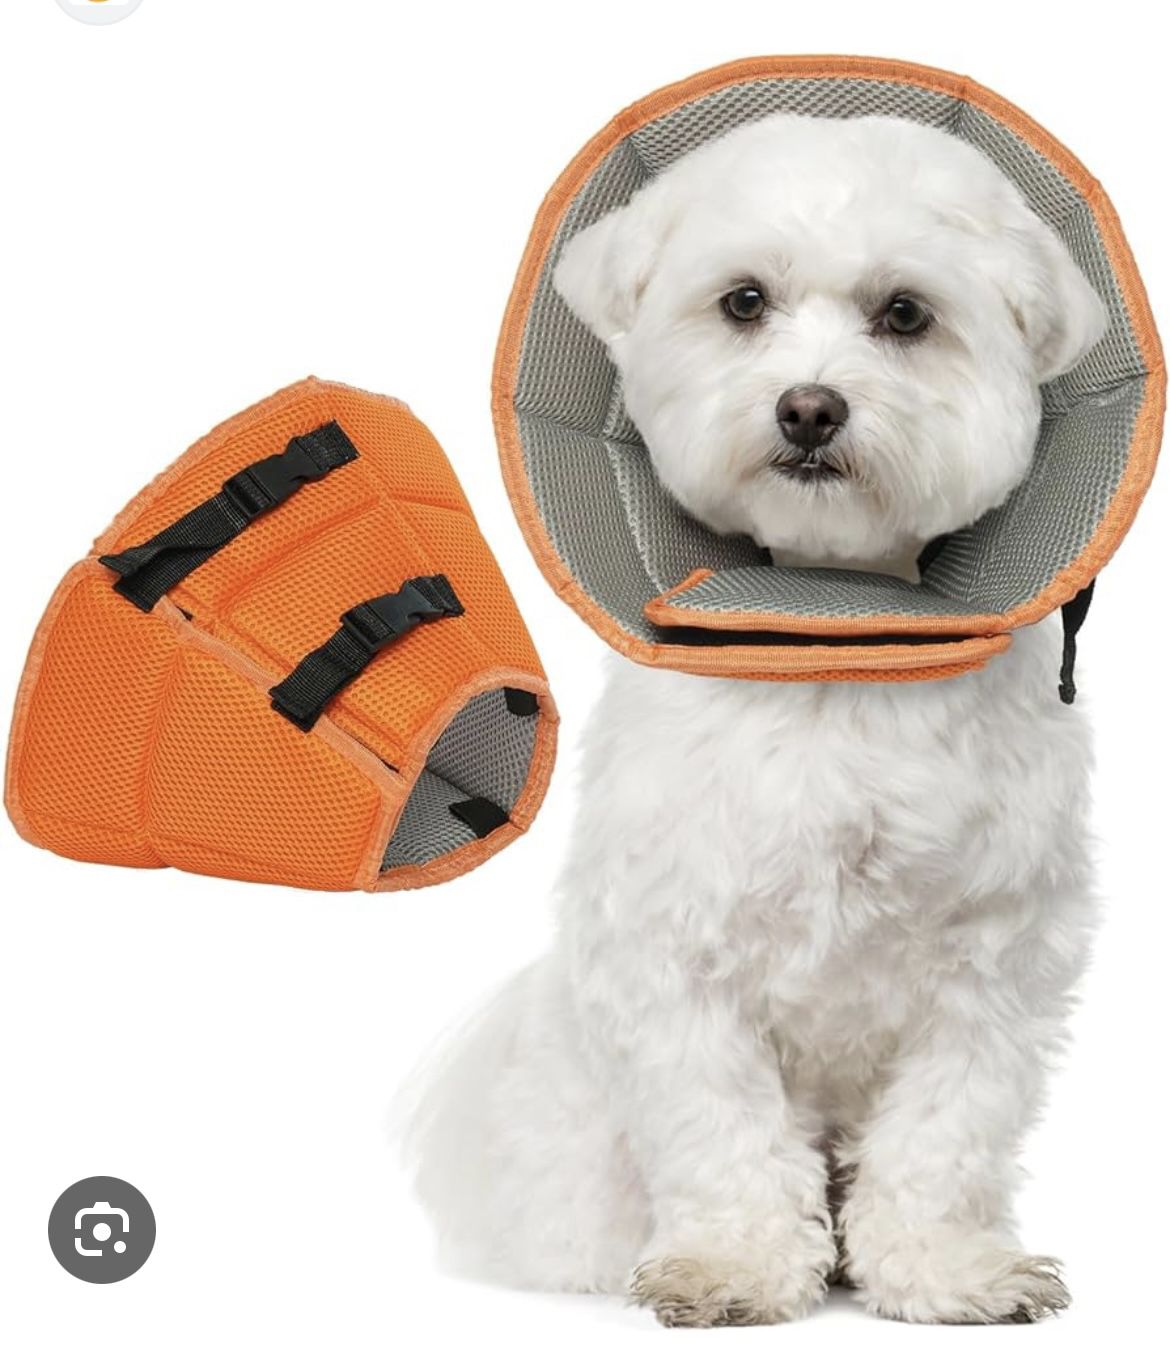 Kuoser Soft Dog Cone Collar After Surgery, Adjustable Dog Recovery Cone. SIZE: Small